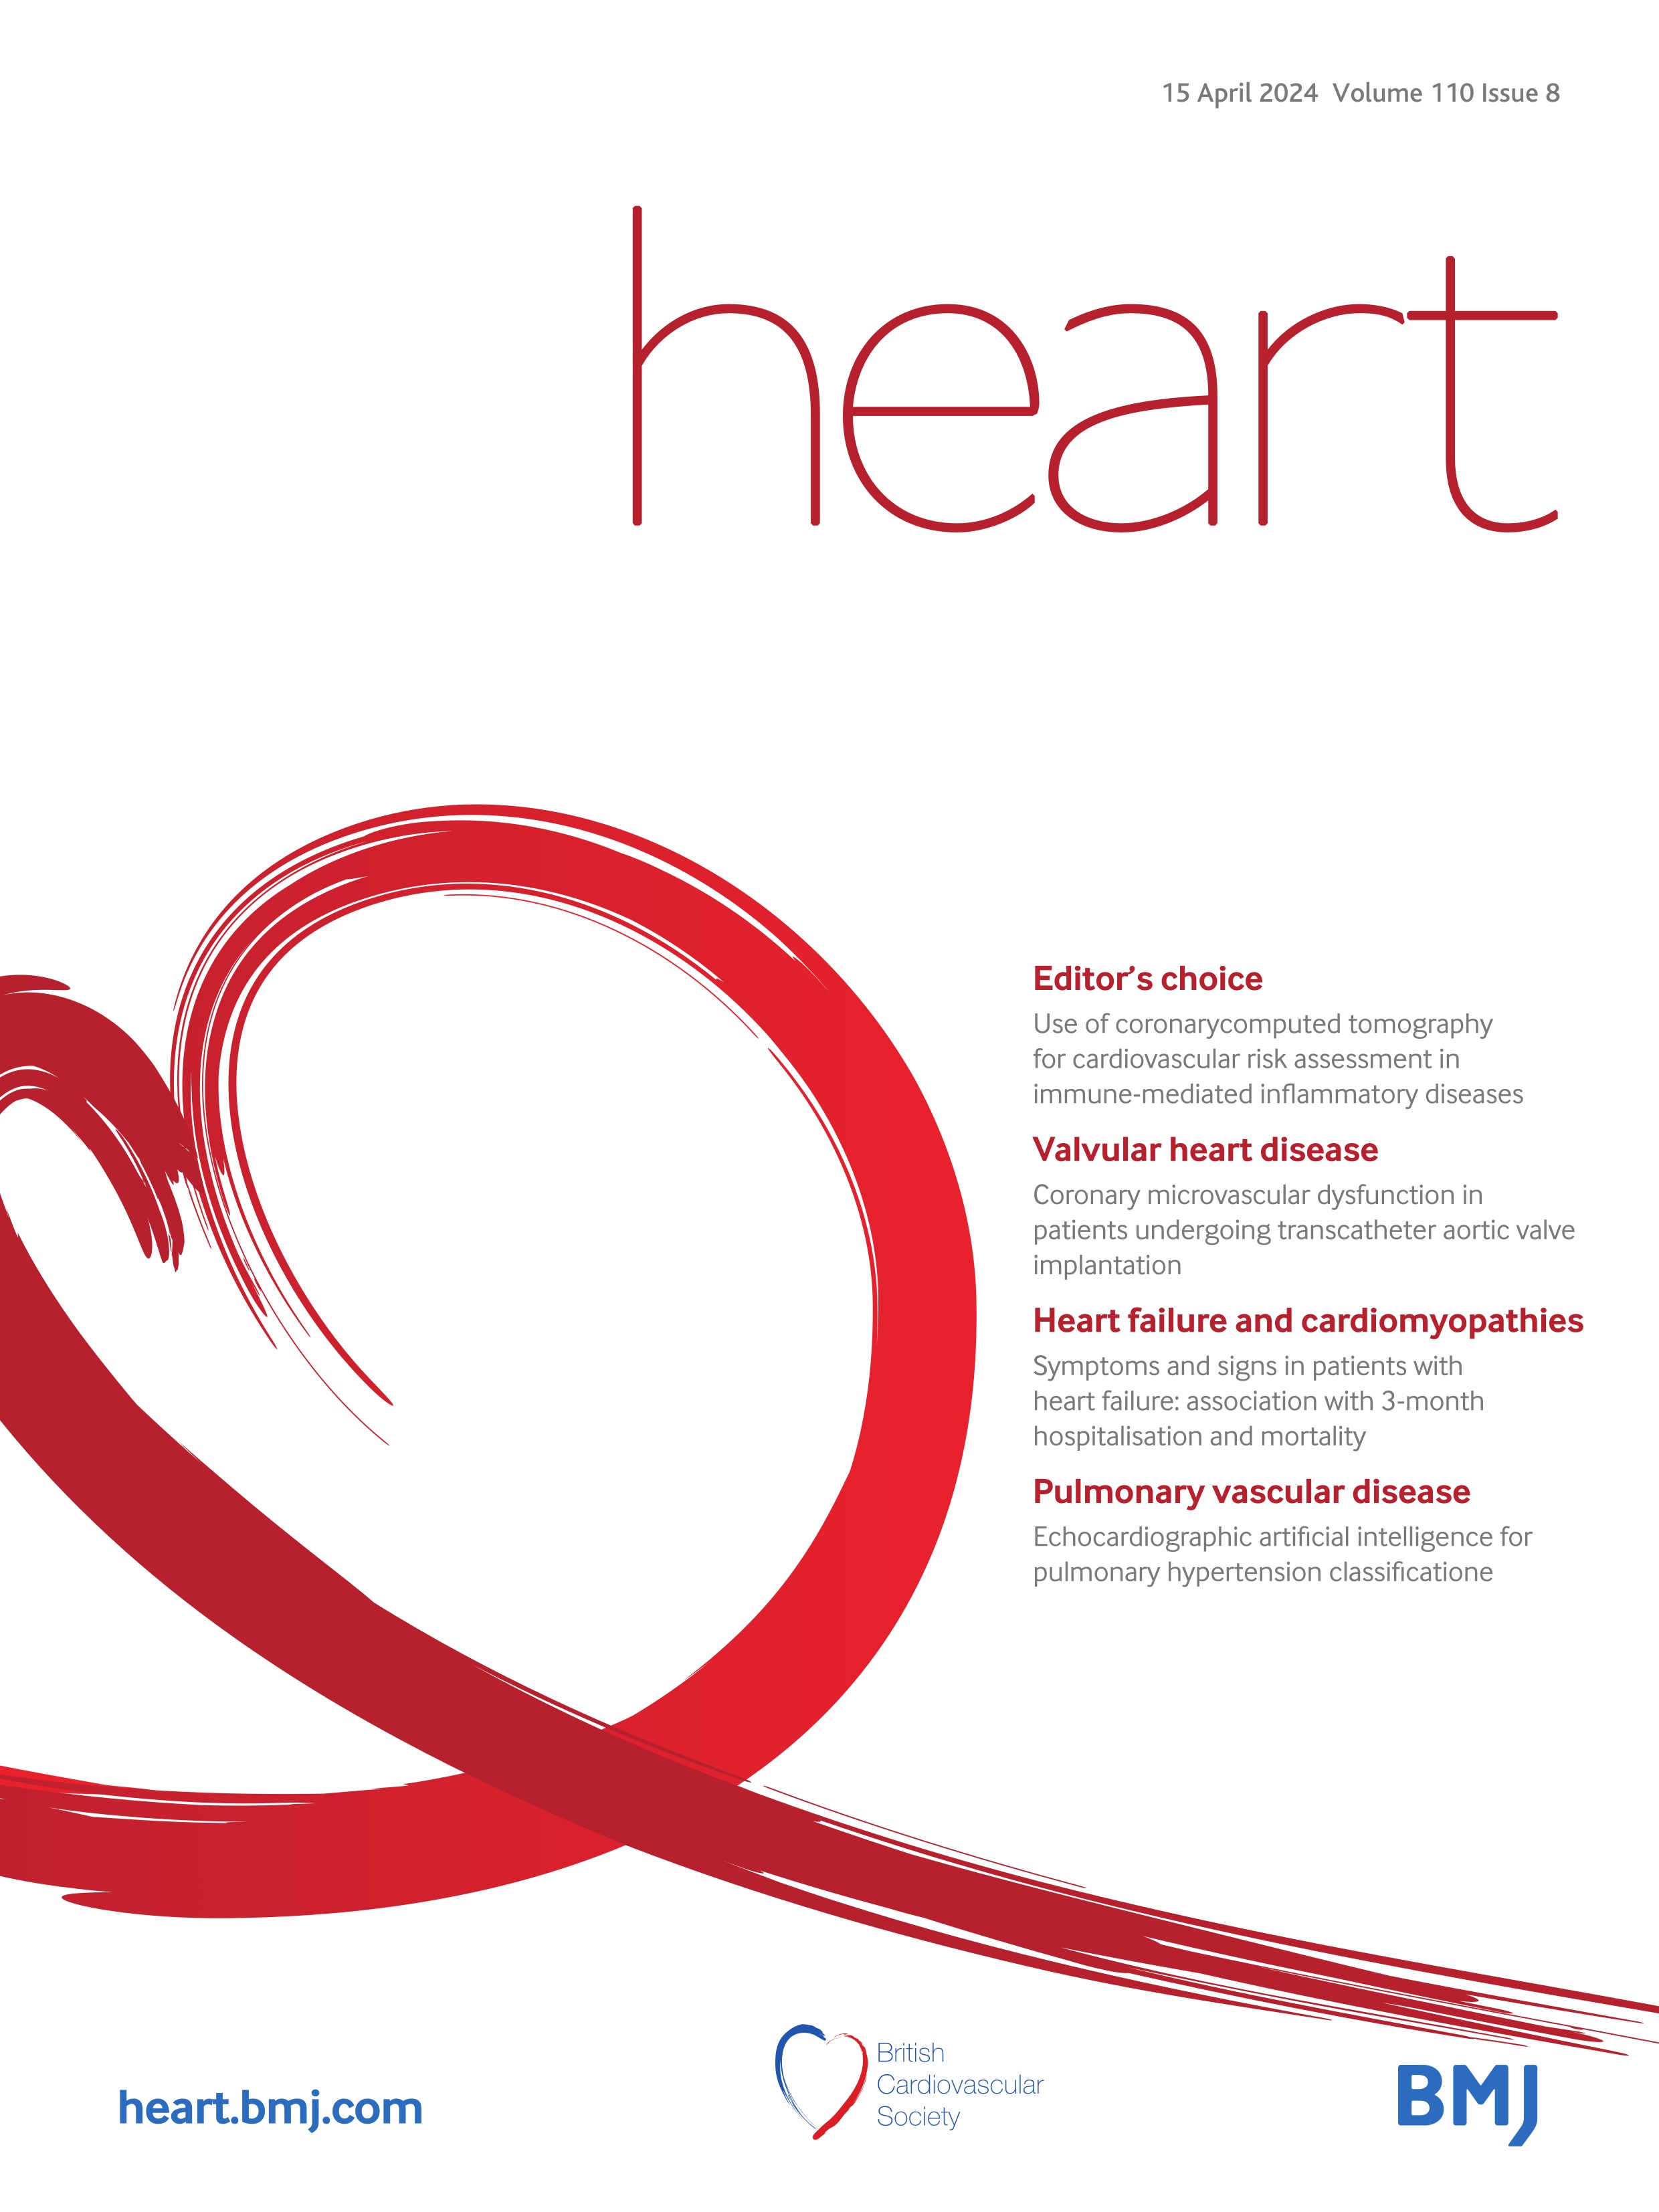 Pulmonary vasodilators and exercise in Fontan circulation: a systematic review and meta-analysis